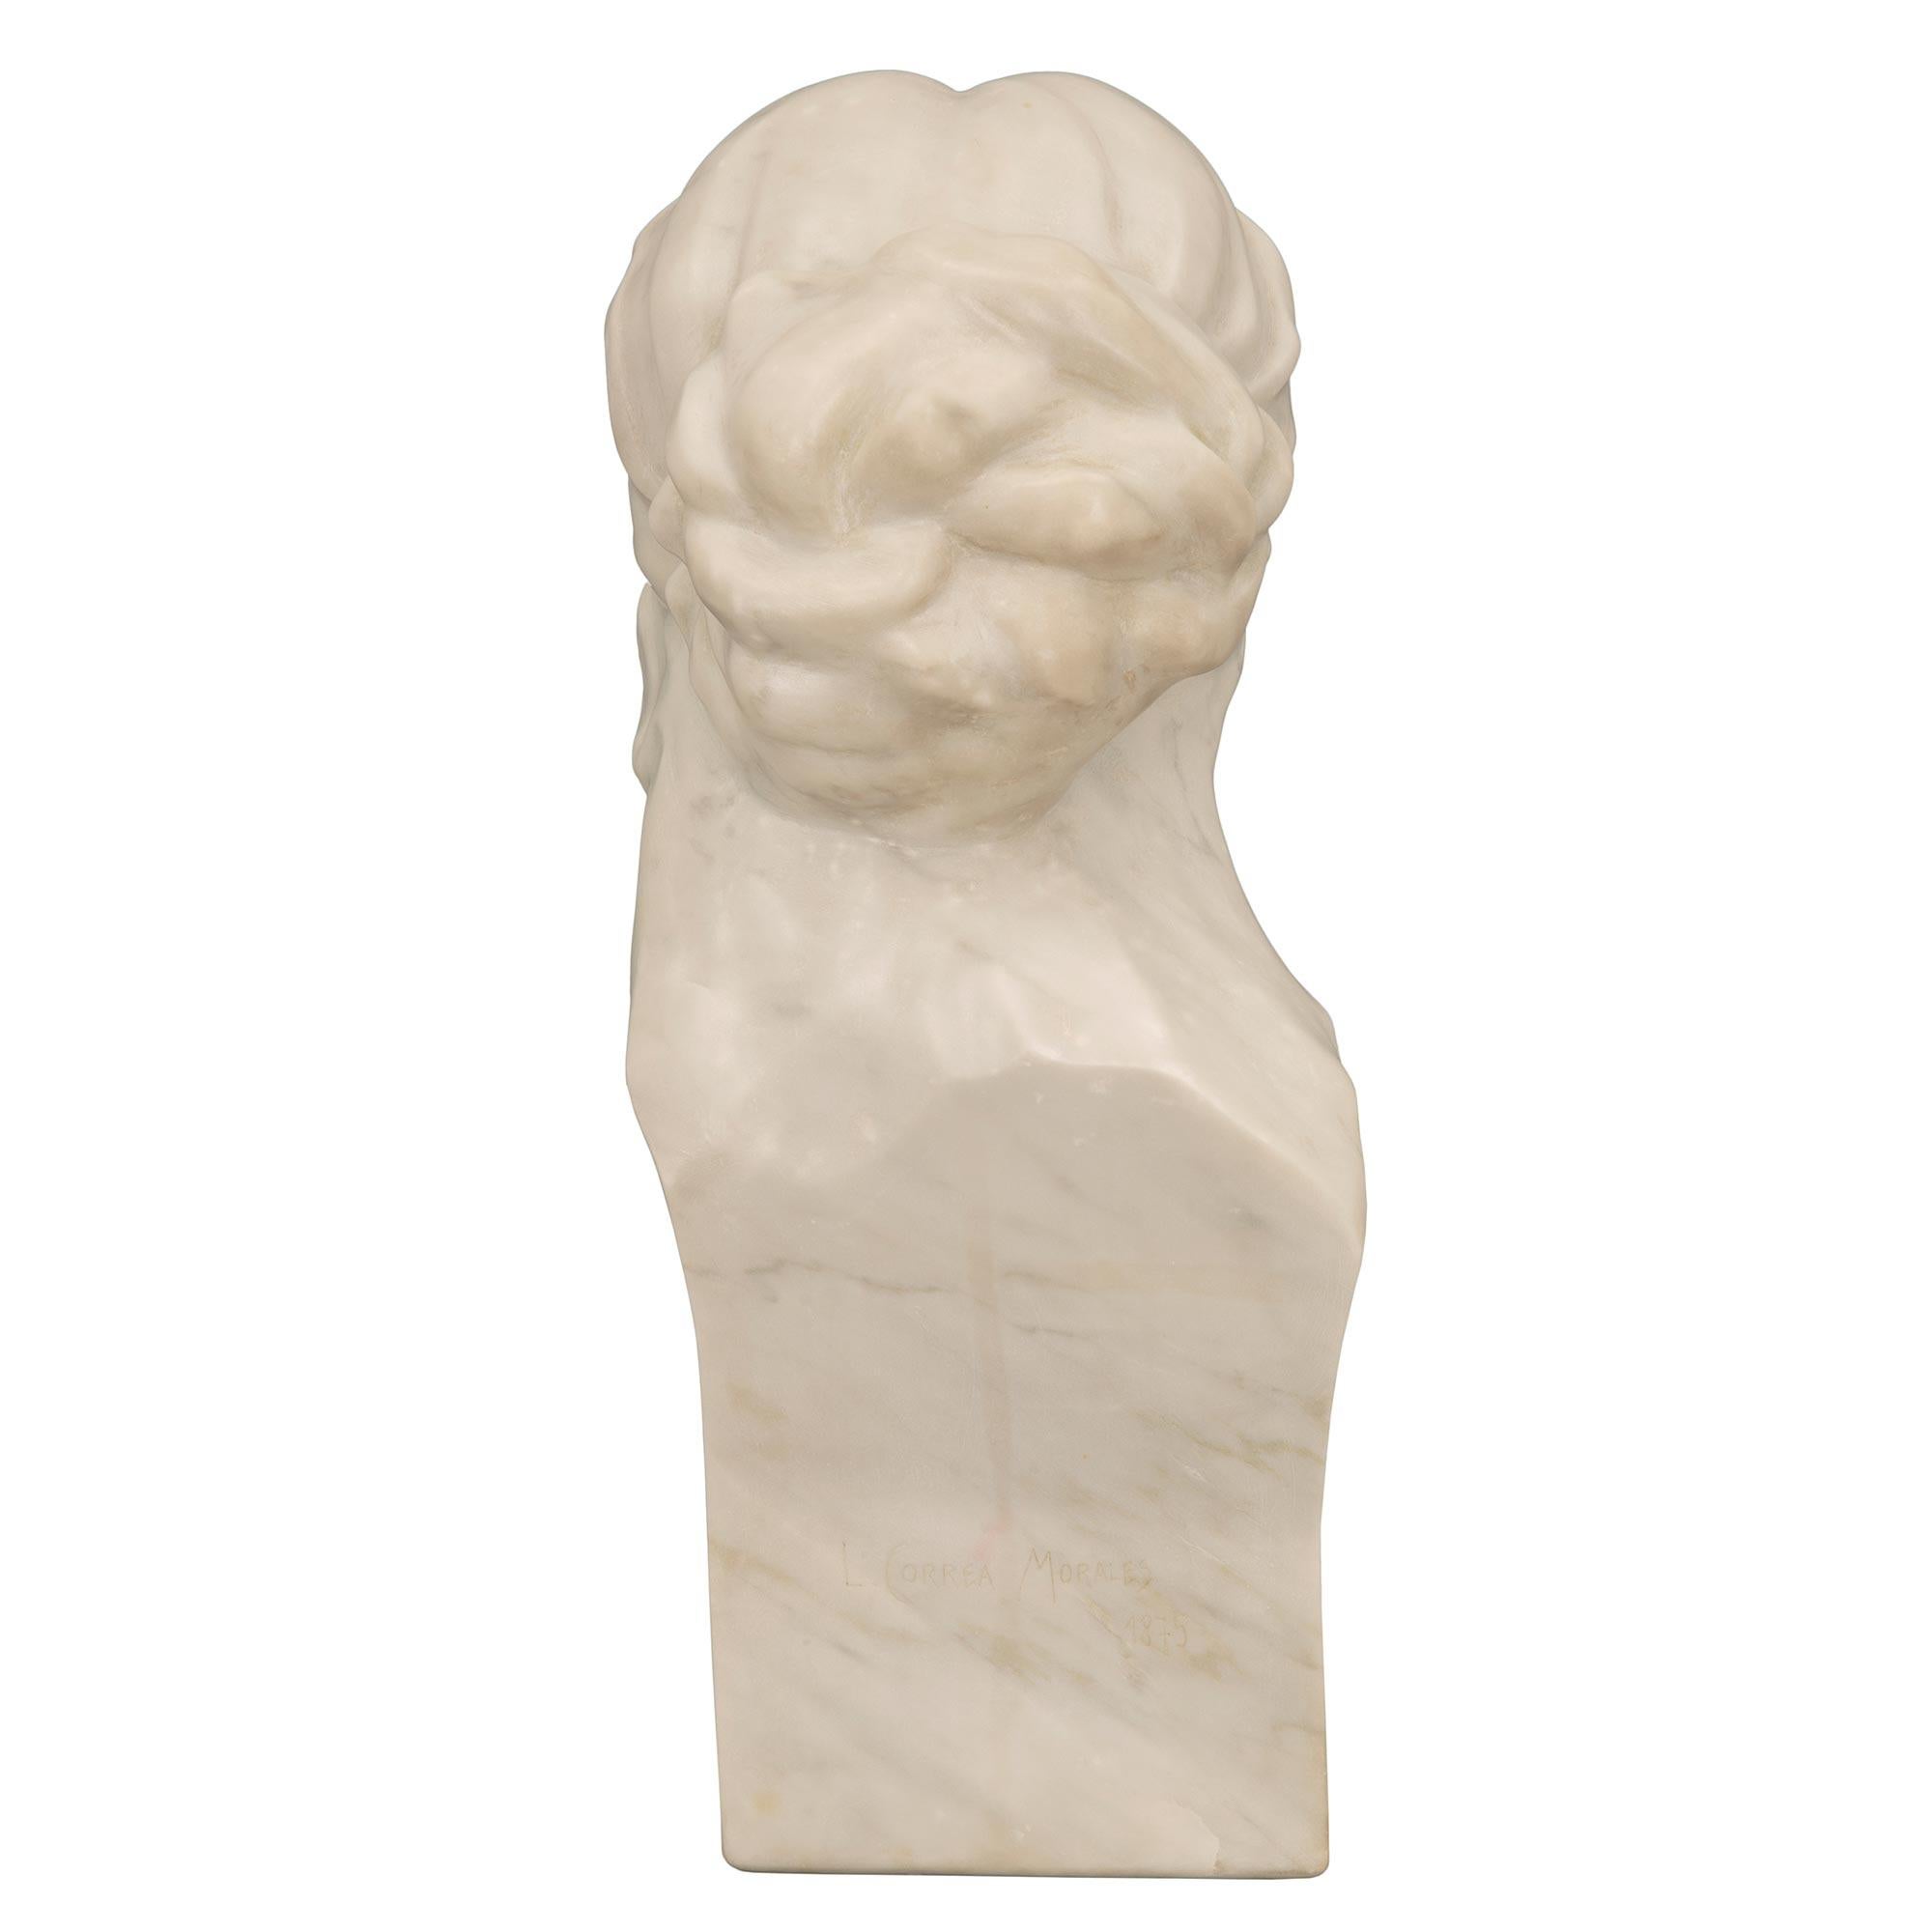 Unknown 19th Century White Carrara Marble Bust Signed, L. Correa Morales, 1875 For Sale